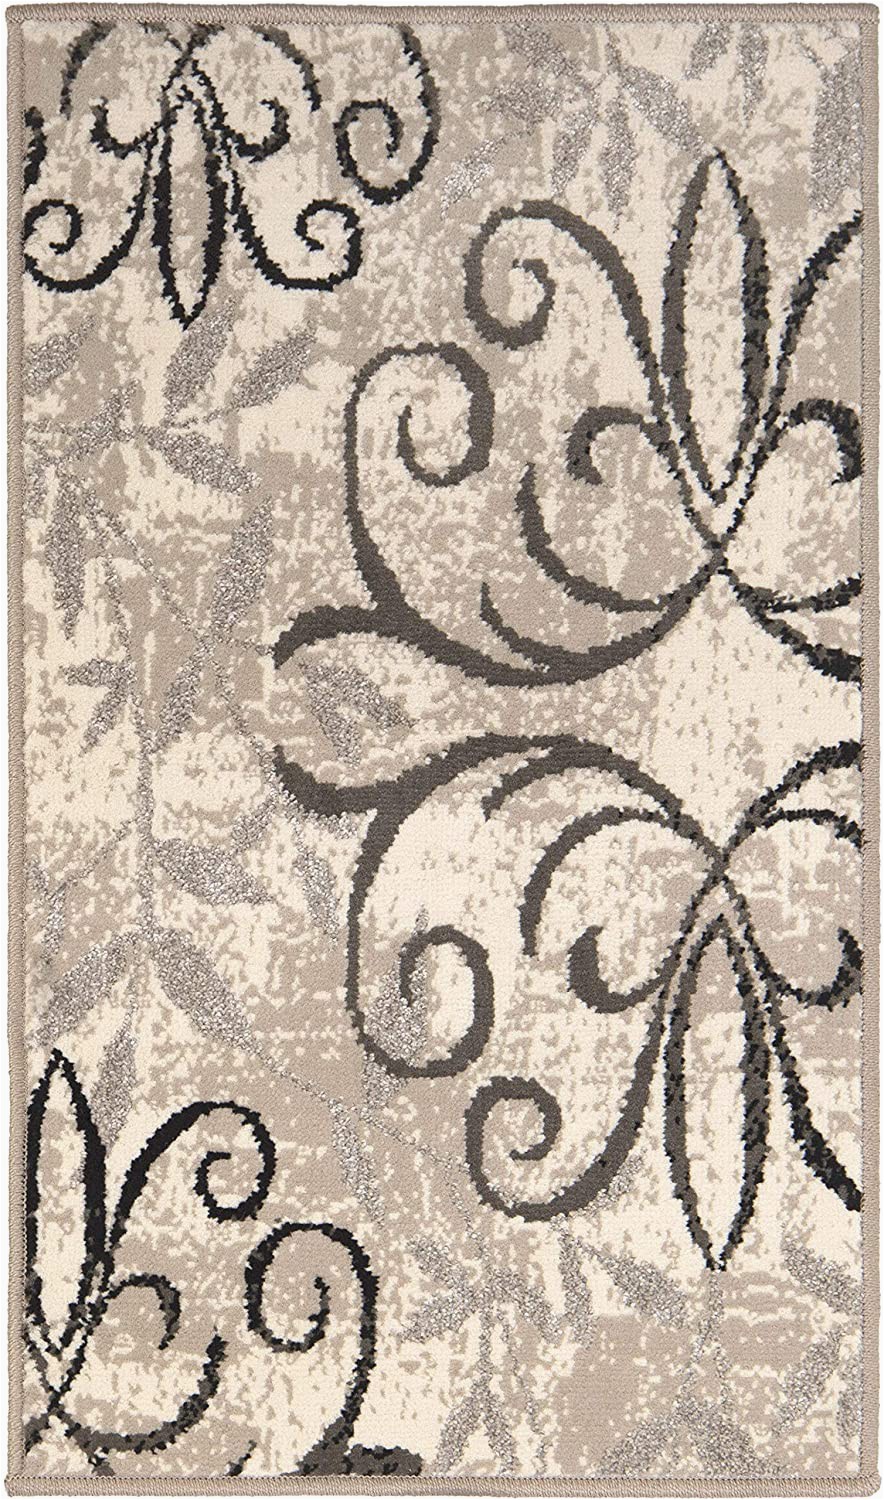 Better Homes and Gardens Iron Fleur area Rug Beige Better Homes Gardens Iron Fleur area Rug Runner Beige